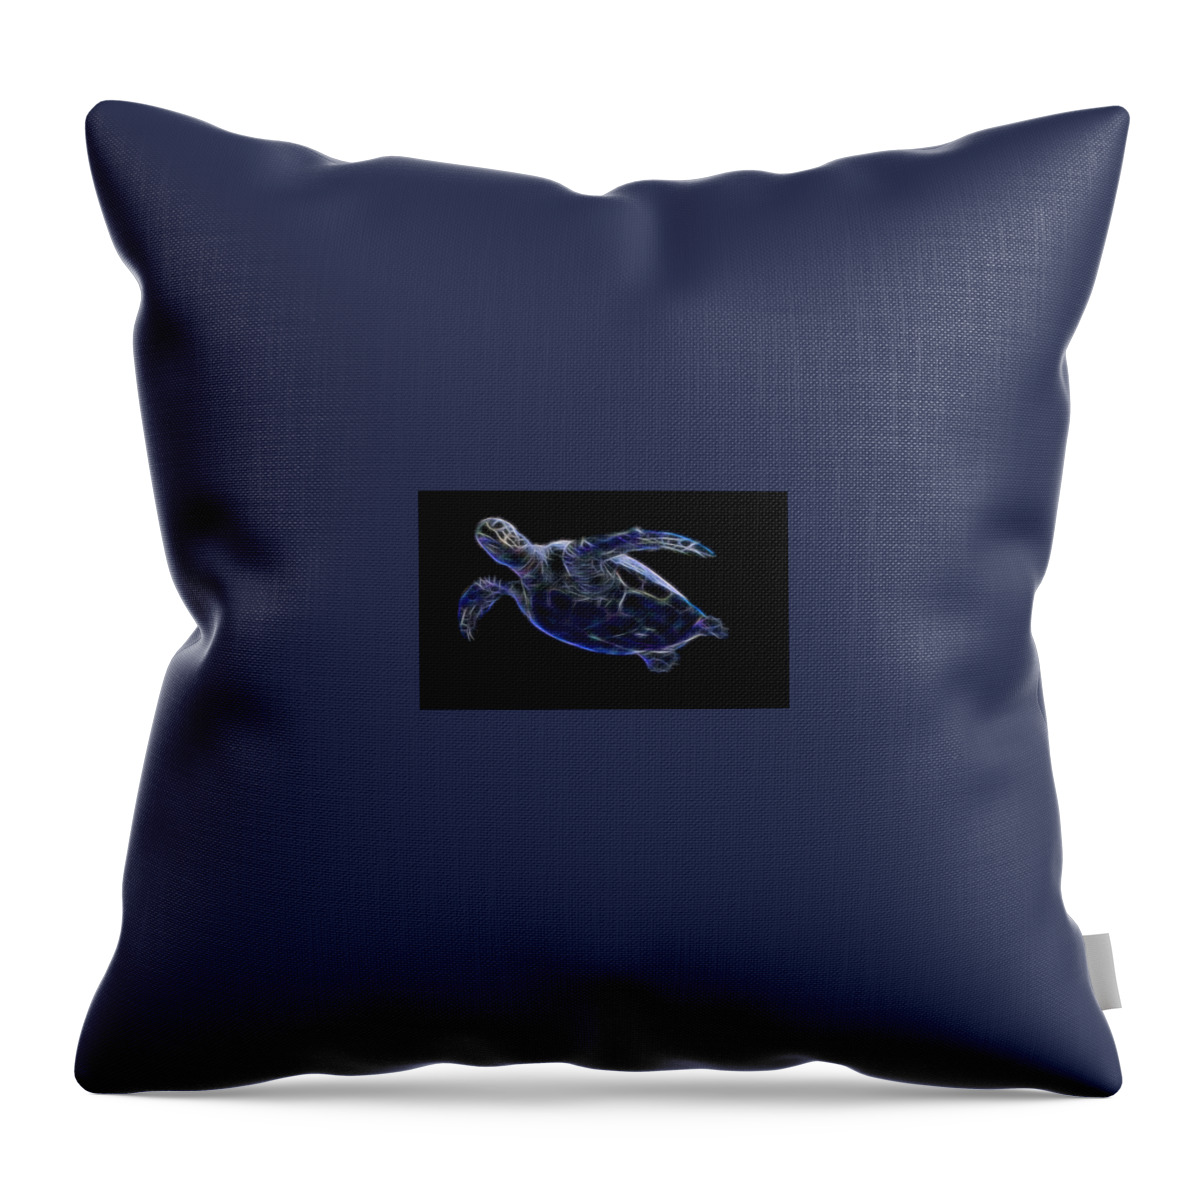 Turtle Throw Pillow featuring the digital art Sea Turtle Fractalized by Gary Hughes